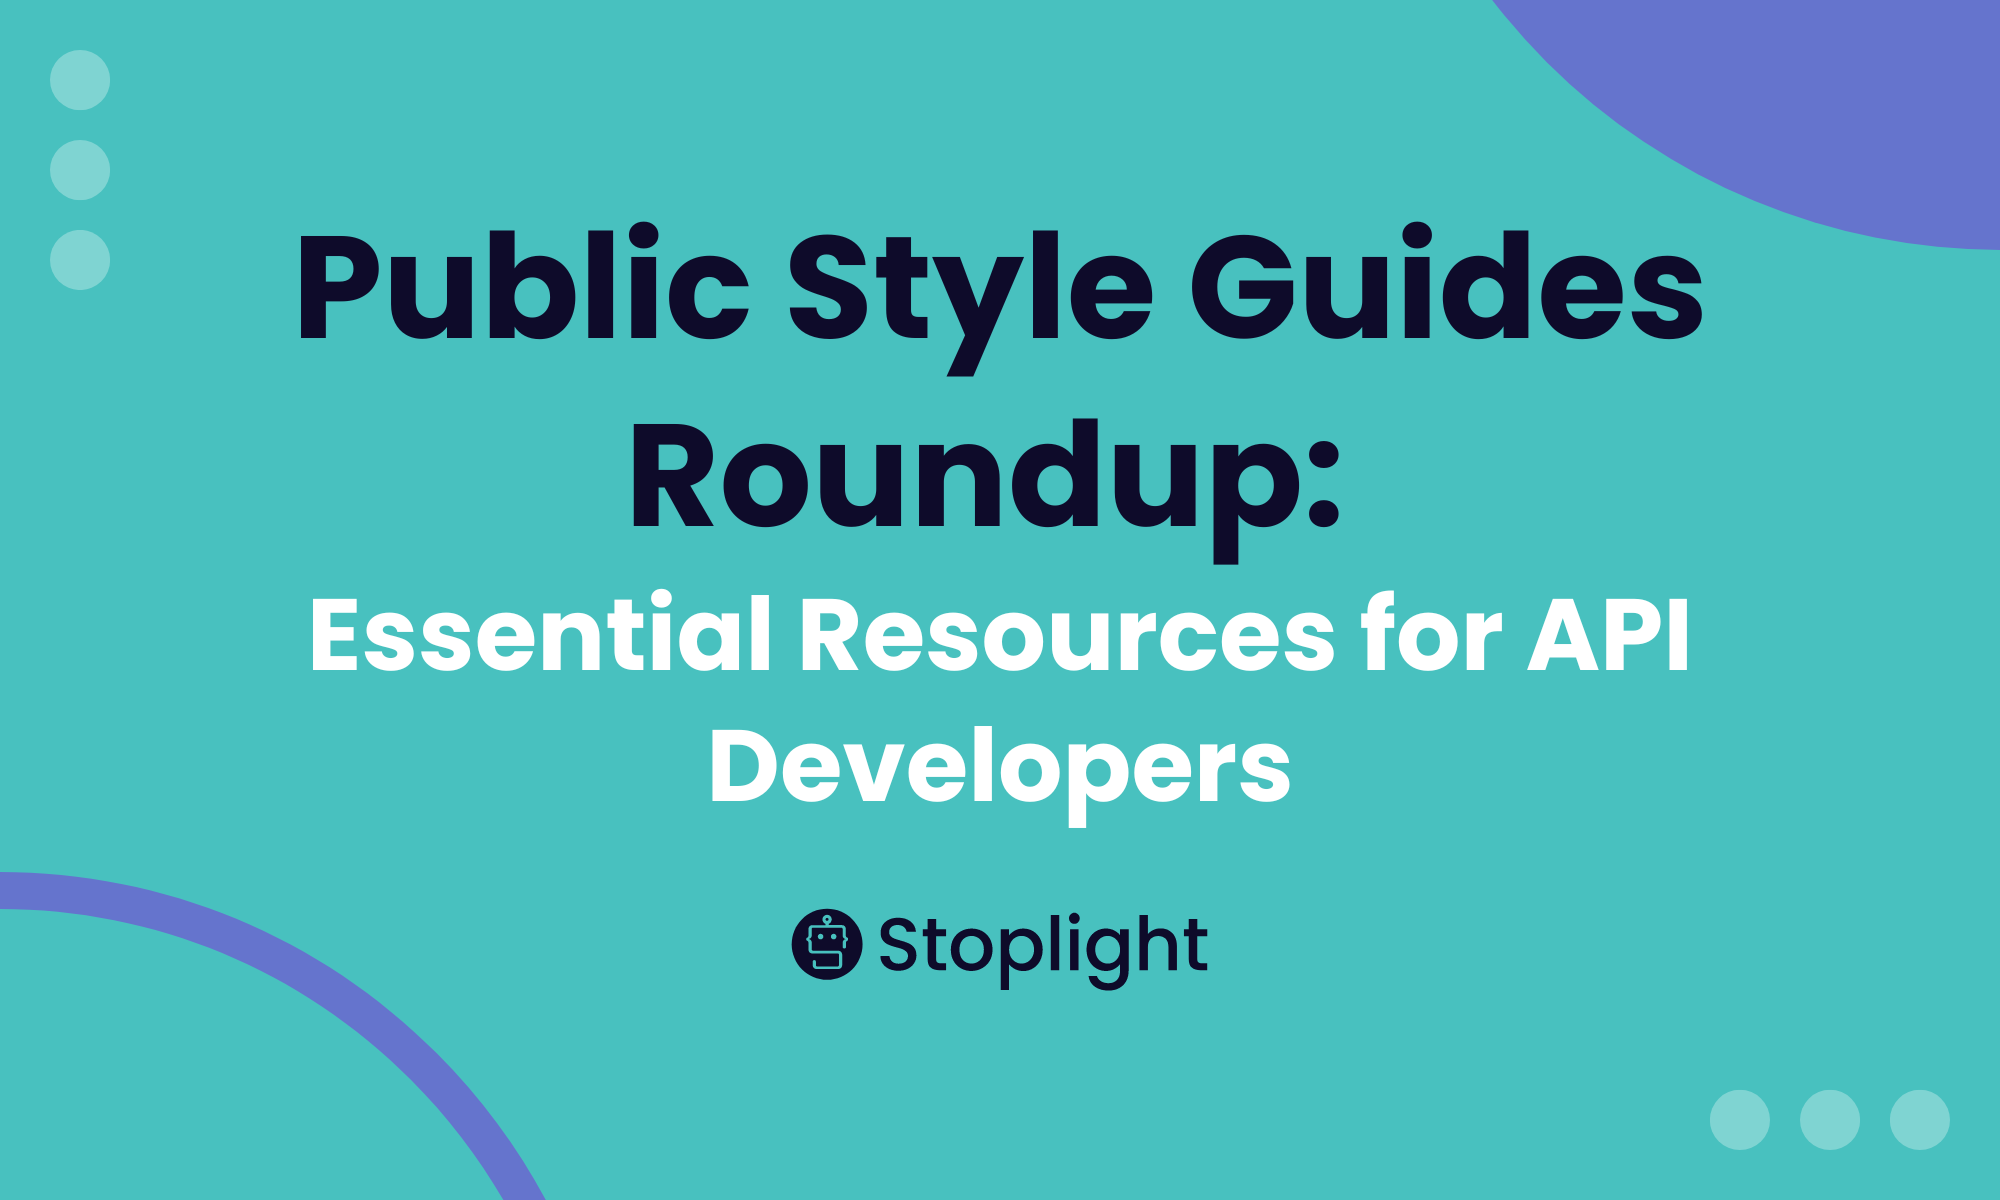 Stoplight’s Public Style Guides: Resources for API Developers